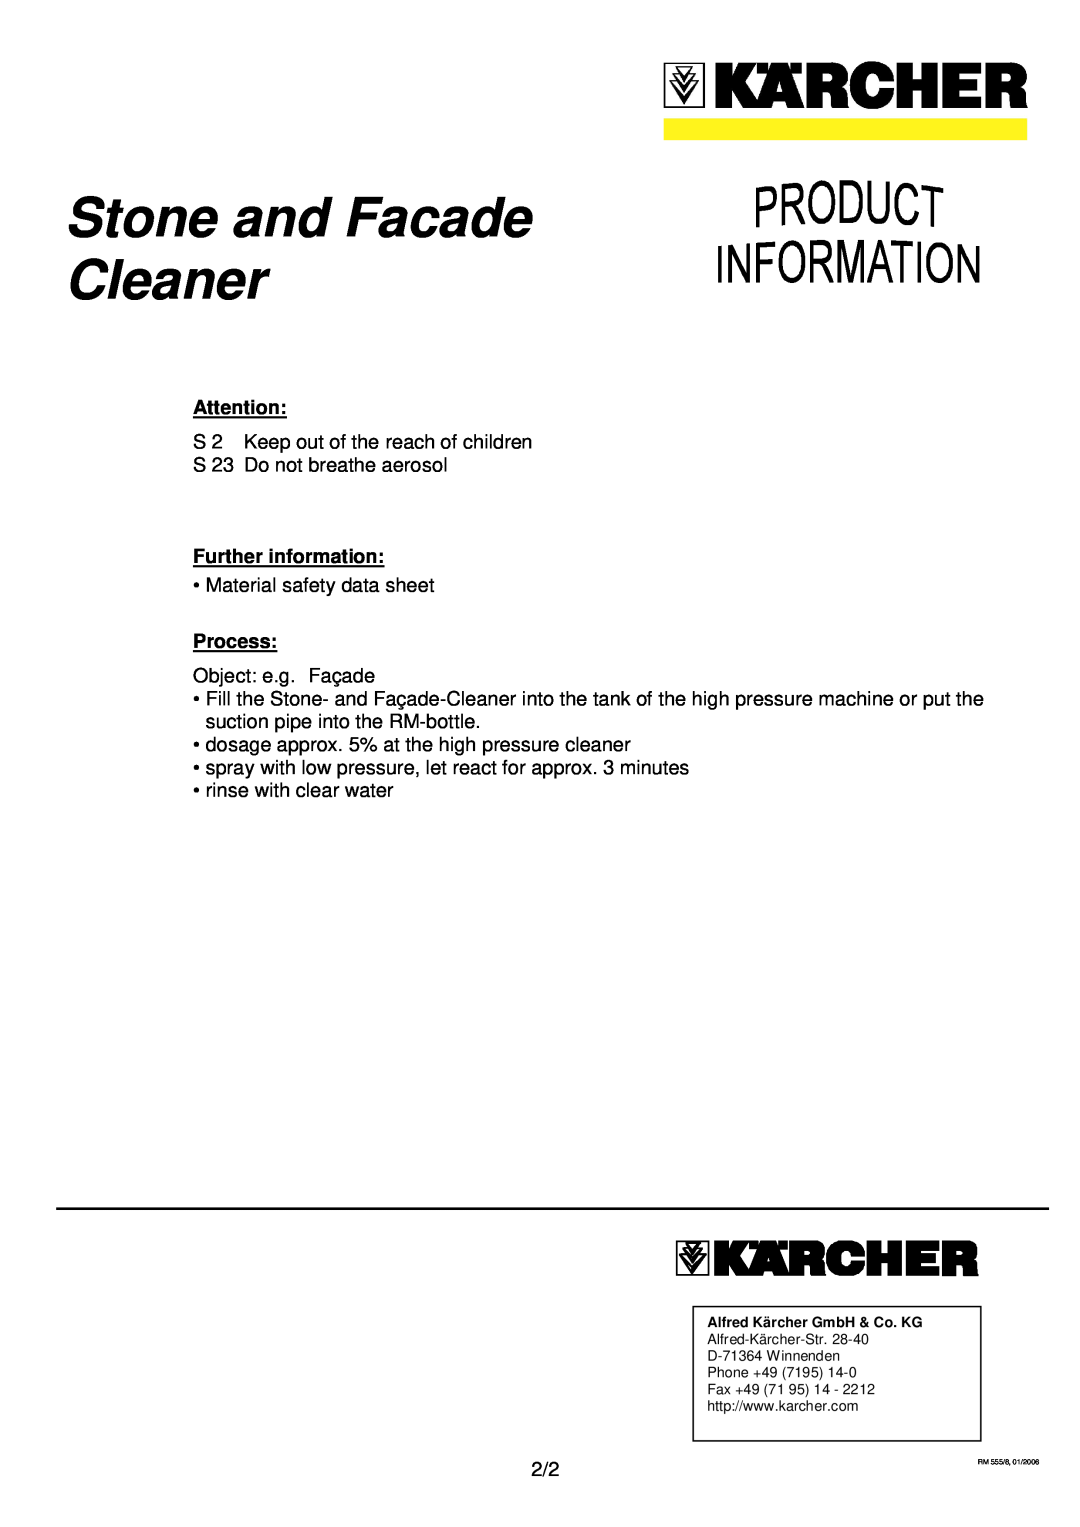 Karcher RM 555/8 manual Stone and Facade Cleaner, Further information, Process 